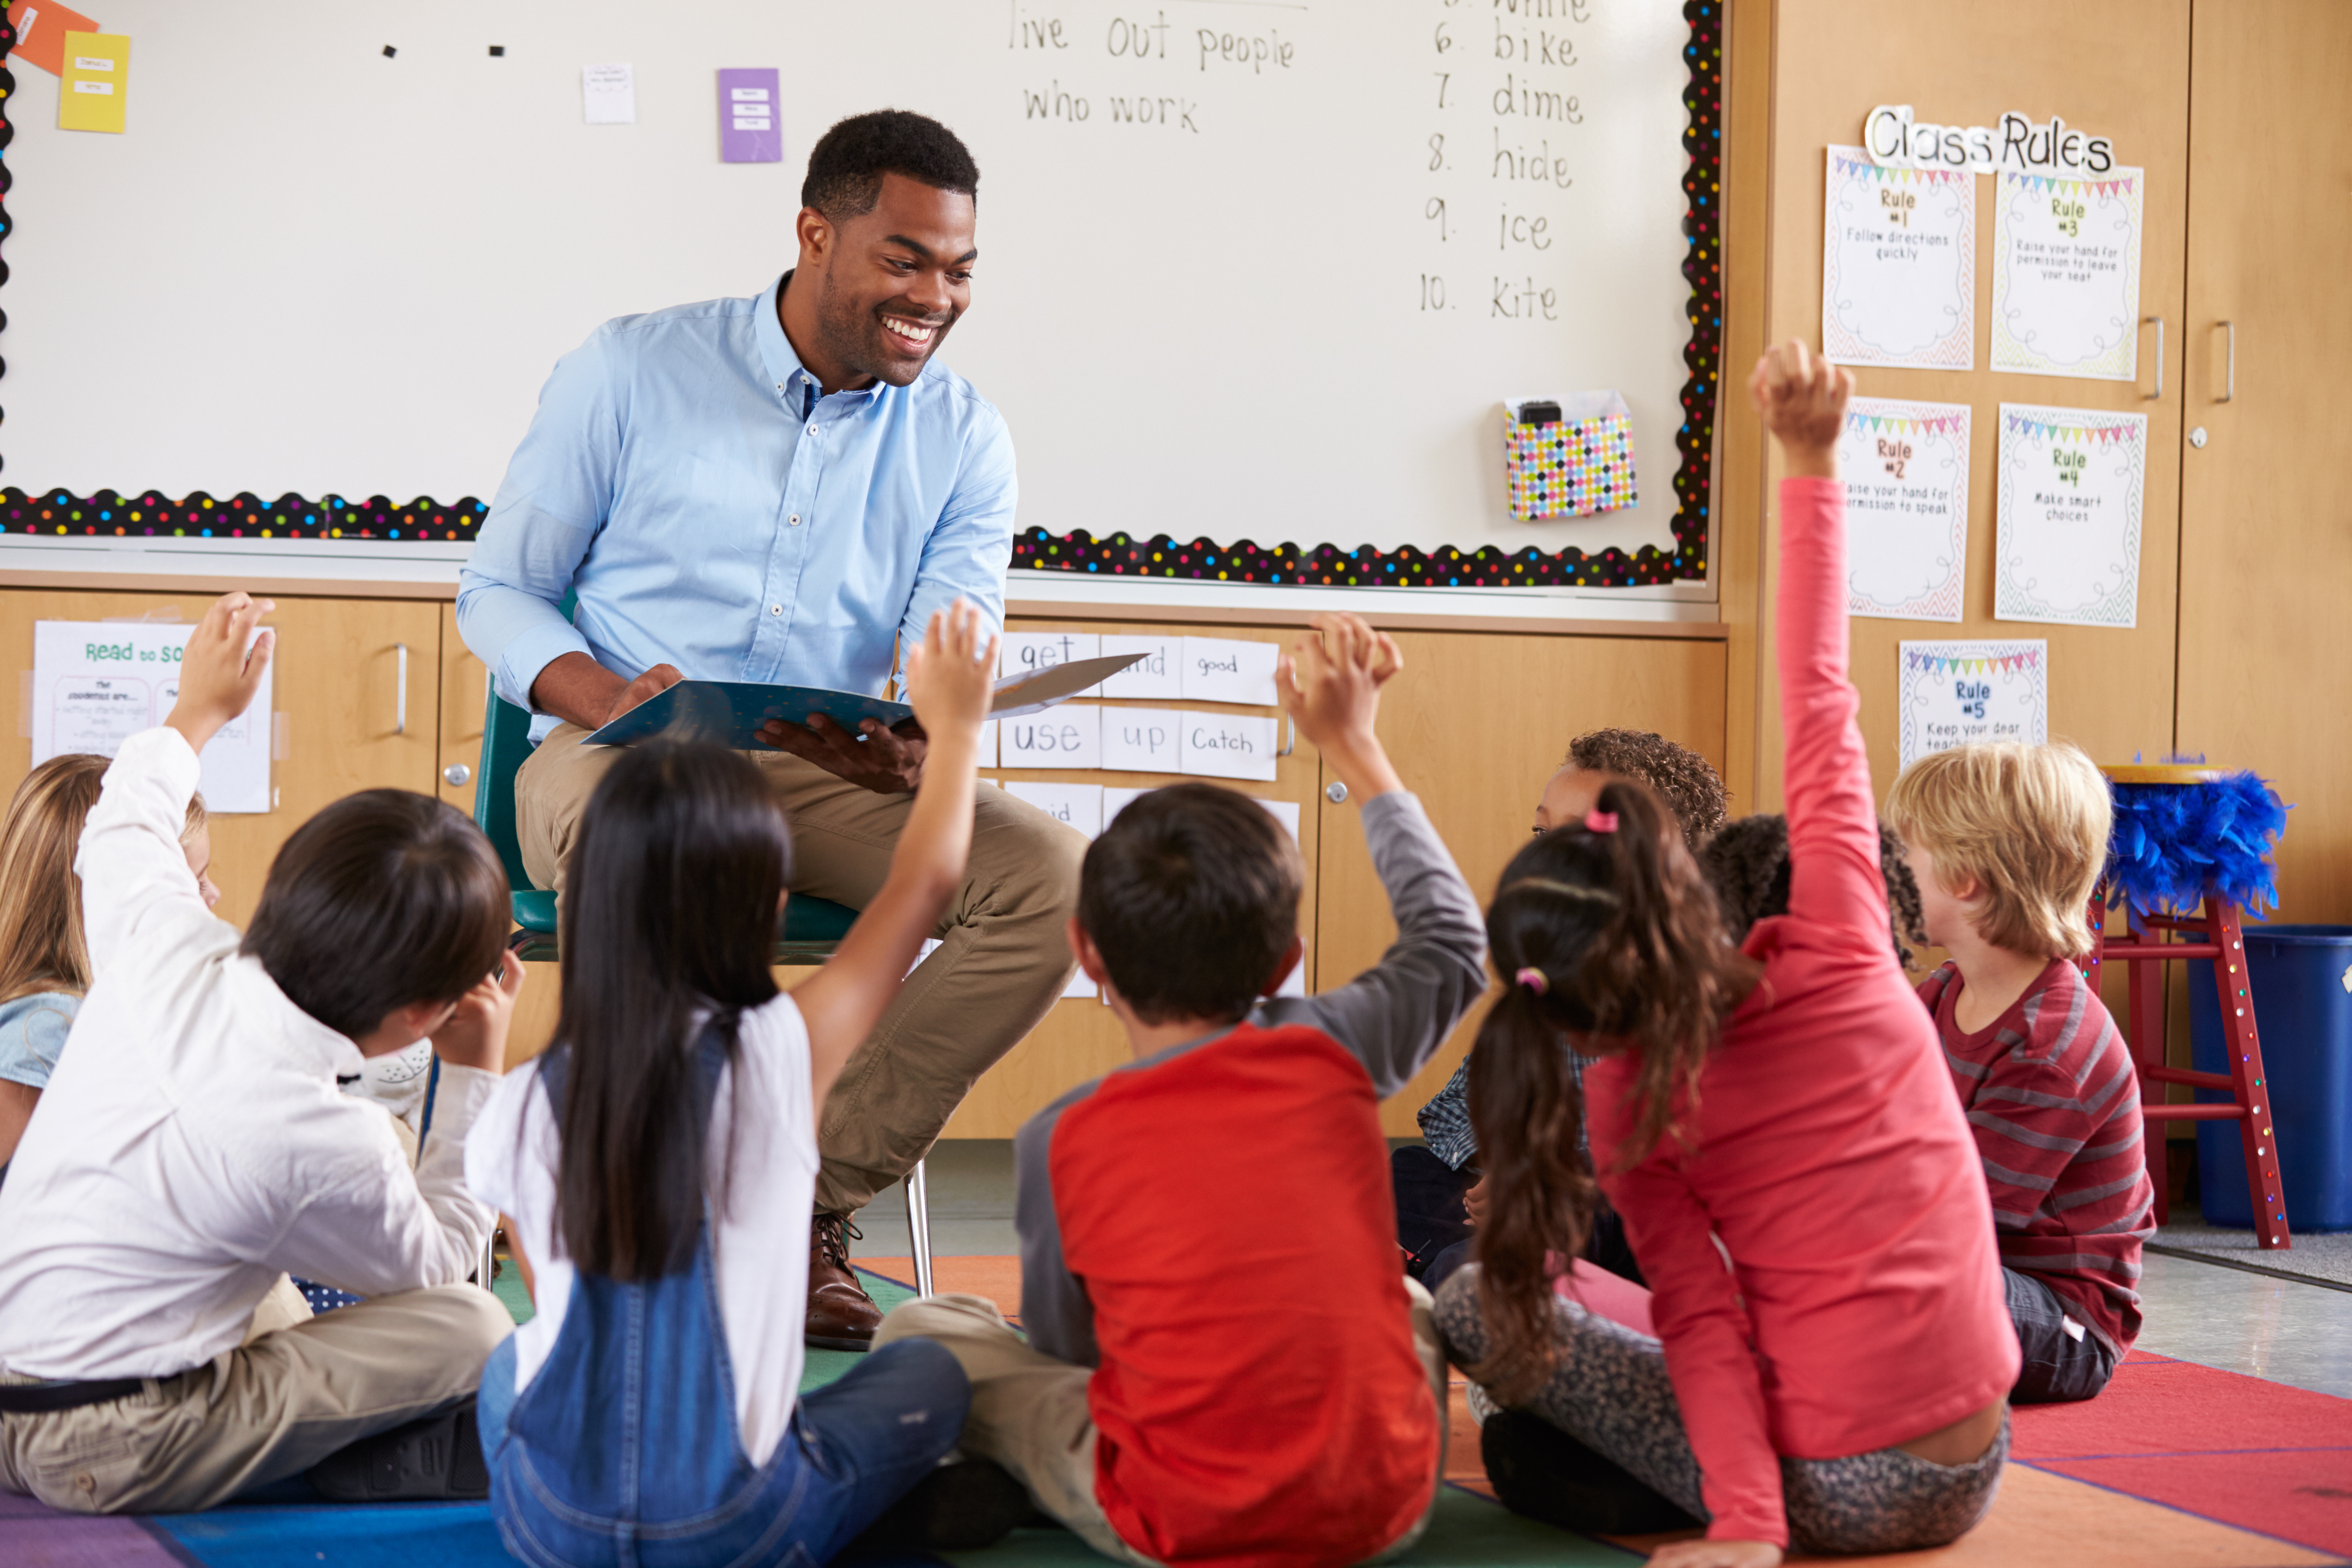 A male teacher is sitting on a chair in a classroom reading a book to a group of students sitting on the floor. He is smiling and some of the students have their hands raised.